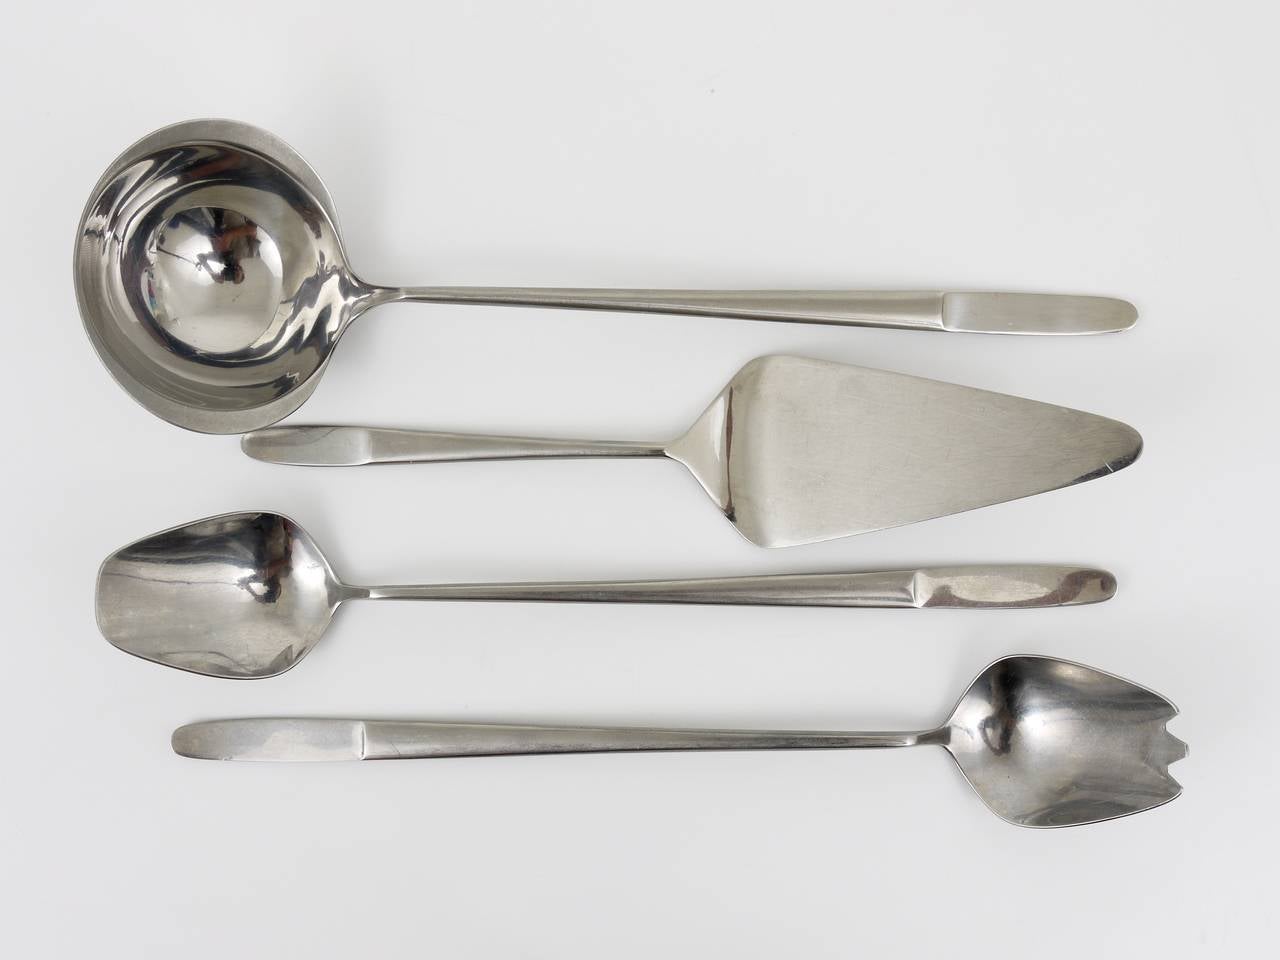 Beautiful modernist flatware from Austria, model 2070, designed by Helmut Alder, executed by Amboss Austria in the 1960s. High-quality flatware, made of stainless steel.
For 12 persons, consists of 12 big spoons, forks and knives and 12 smaller